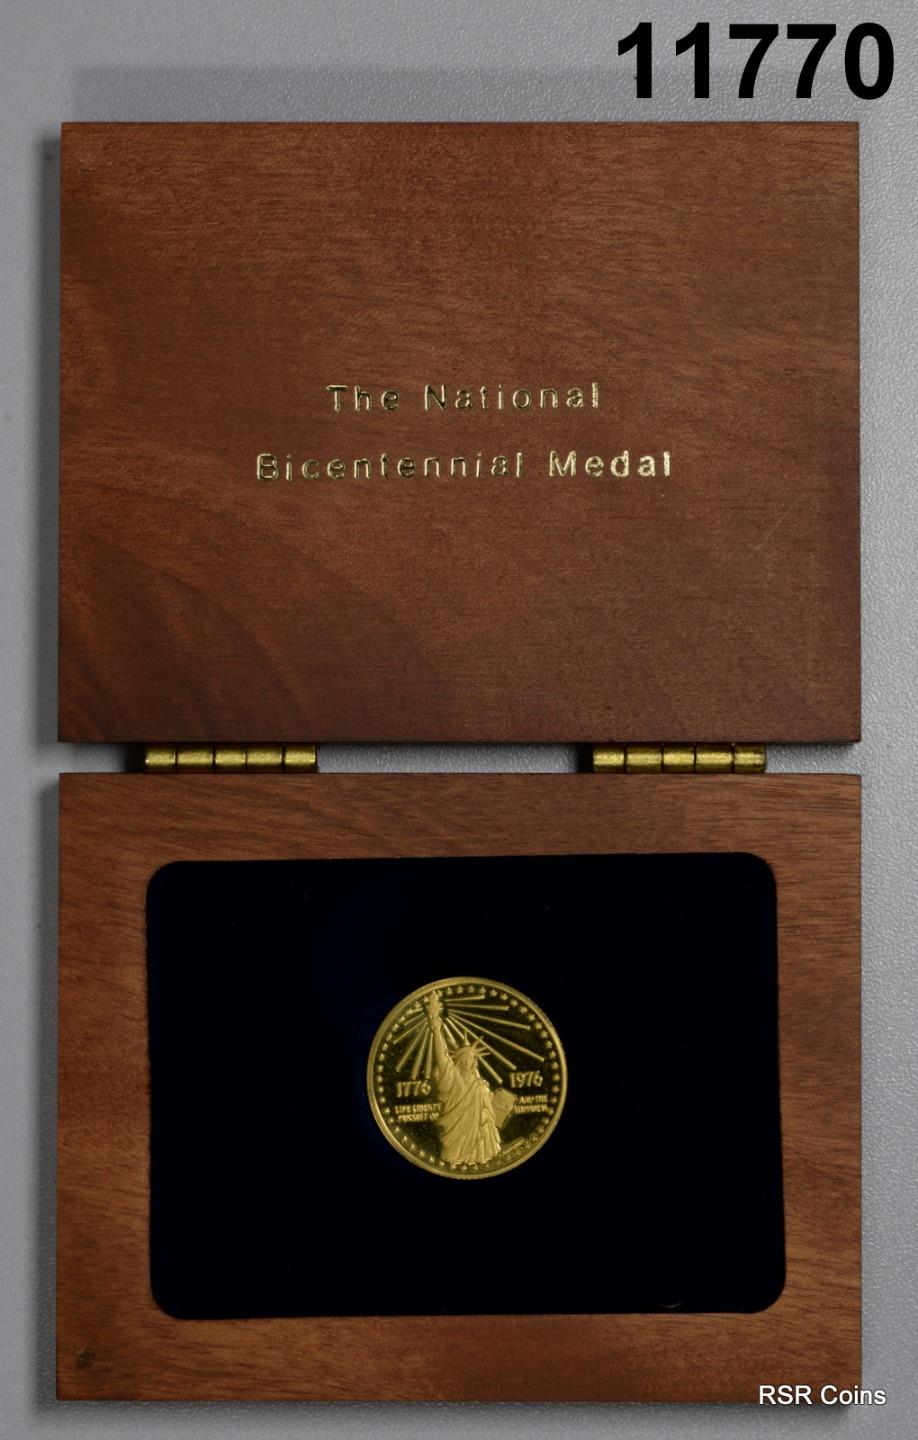 1976 GOLD US MINT 12.85 GRAMS PROOF NATIONAL BICENTENNIAL MEDAL IN BOX #11770